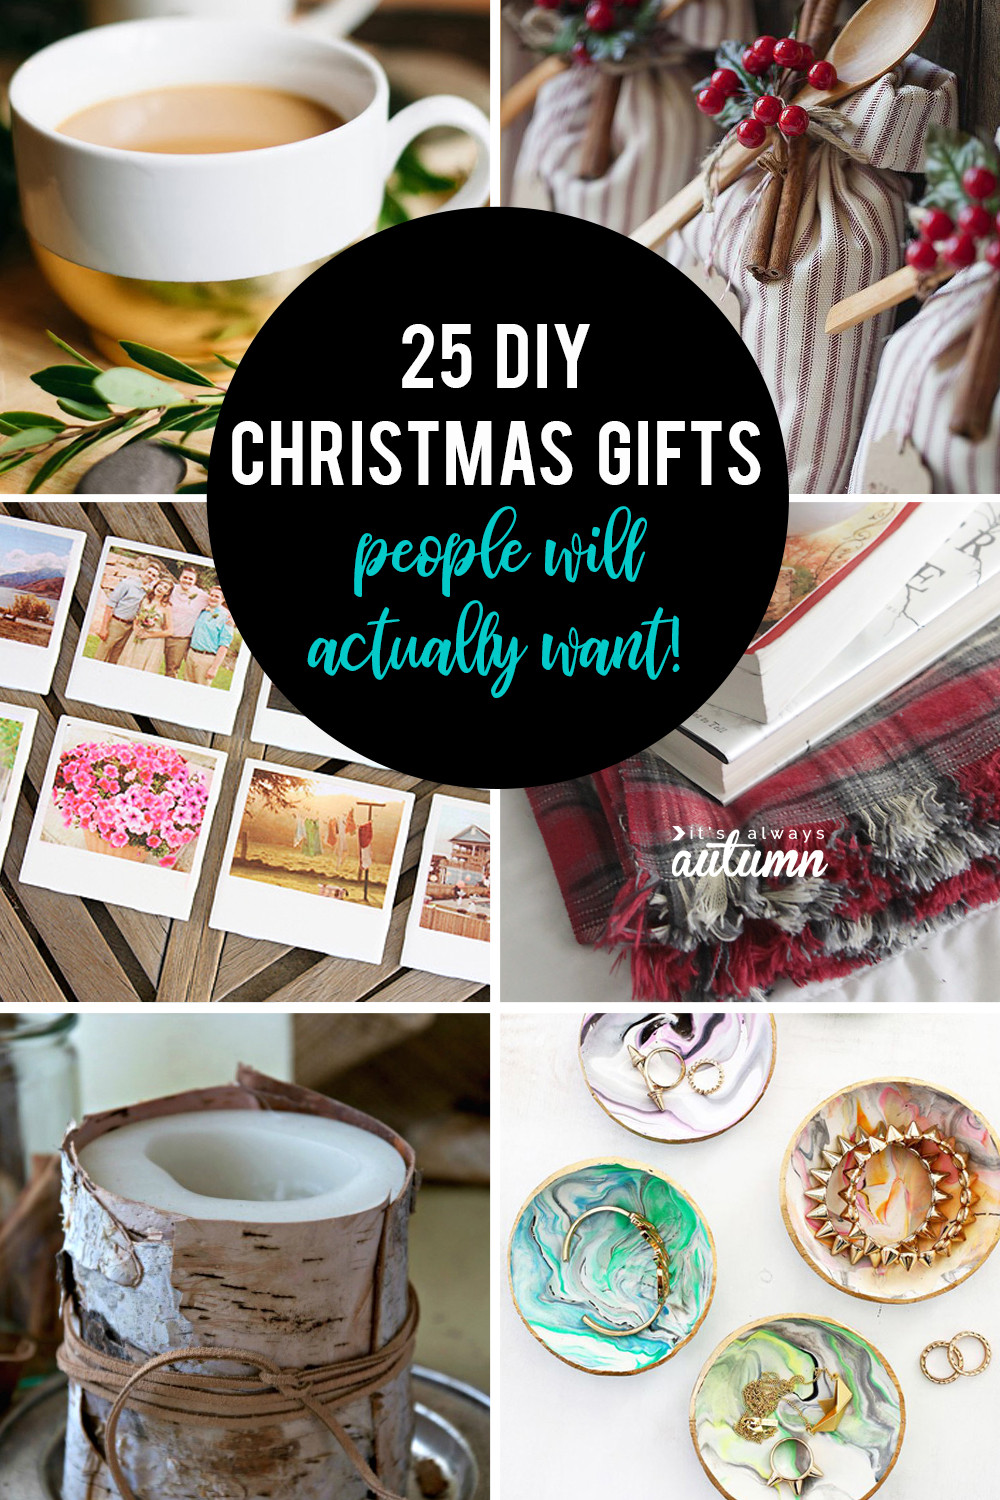 DIY Gifts For Christmas
 25 amazing DIY ts people will actually want It s